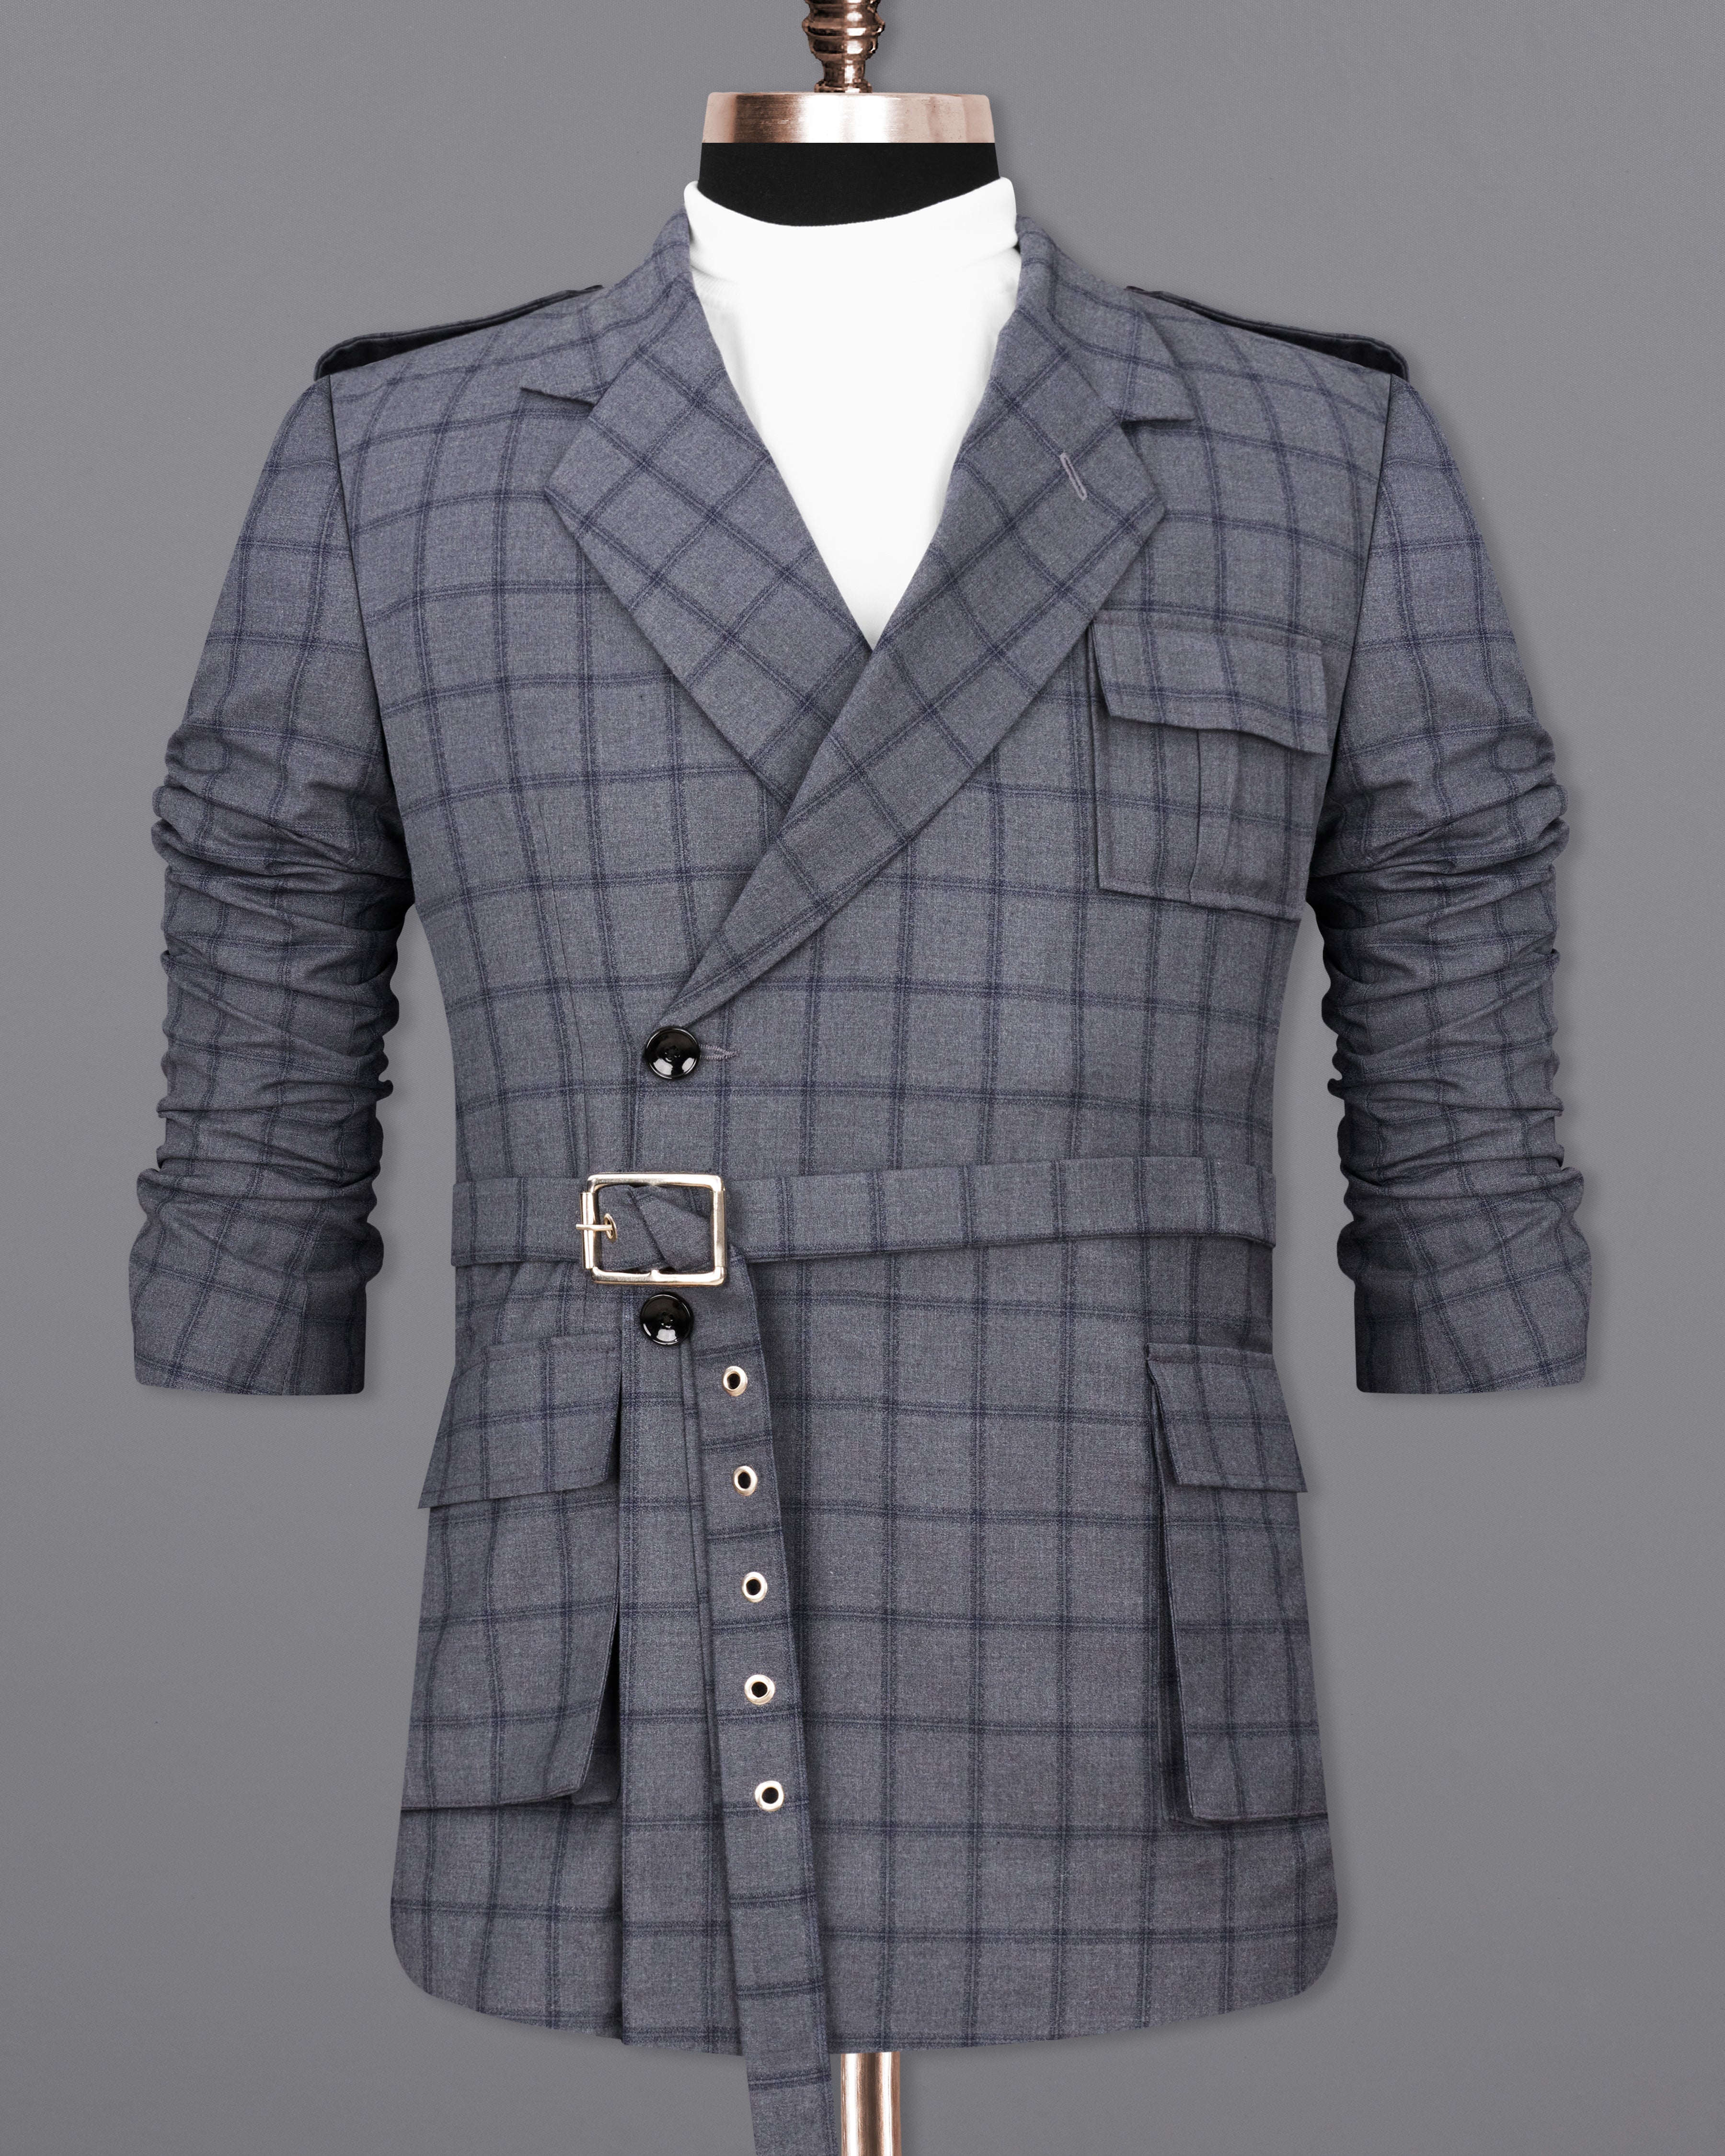 Wenge Gray Windowpane Double Breasted Designer Suit with Belt Closure ST2373-DB-D43-36, ST2373-DB-D43-38, ST2373-DB-D43-40, ST2373-DB-D43-42, ST2373-DB-D43-44, ST2373-DB-D43-46, ST2373-DB-D43-48, ST2373-DB-D43-50, ST2373-DB-D43-52, ST2373-DB-D43-54, ST2373-DB-D43-56, ST2373-DB-D43-58, ST2373-DB-D43-60